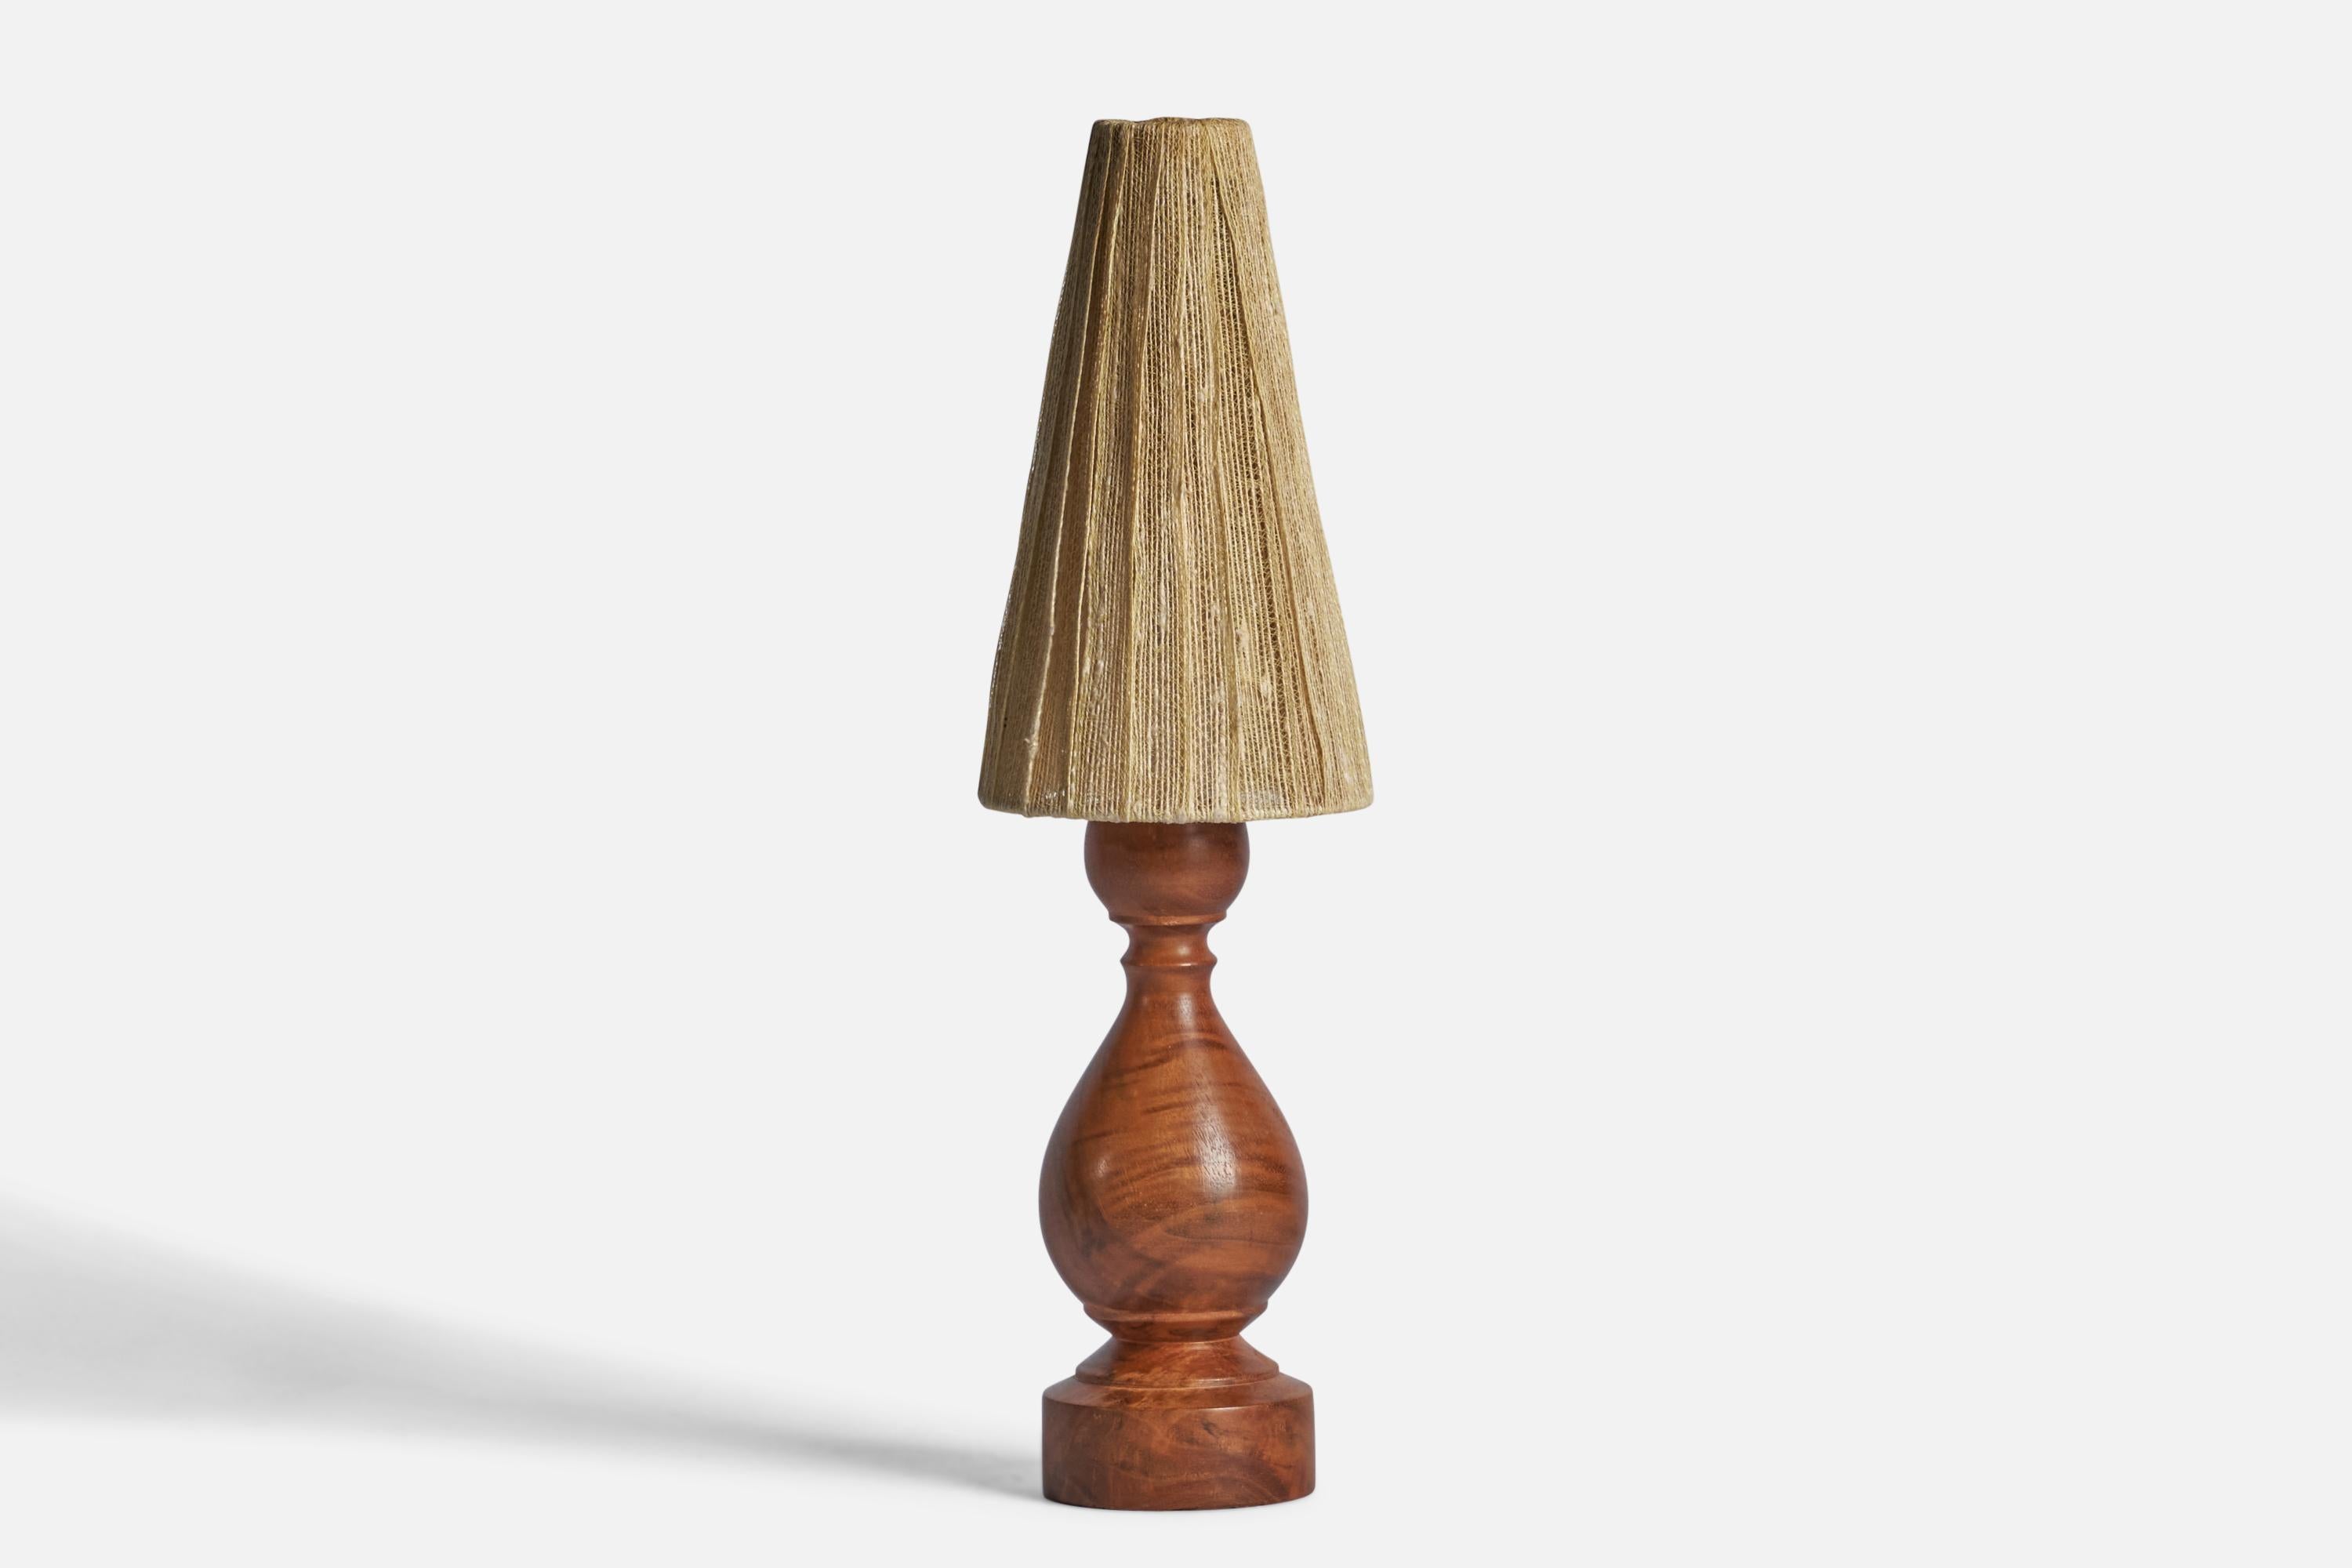 A walnut and string fabric table lamp designed and produced in Sweden, 1940s.

Overall Dimensions (inches): 15.15